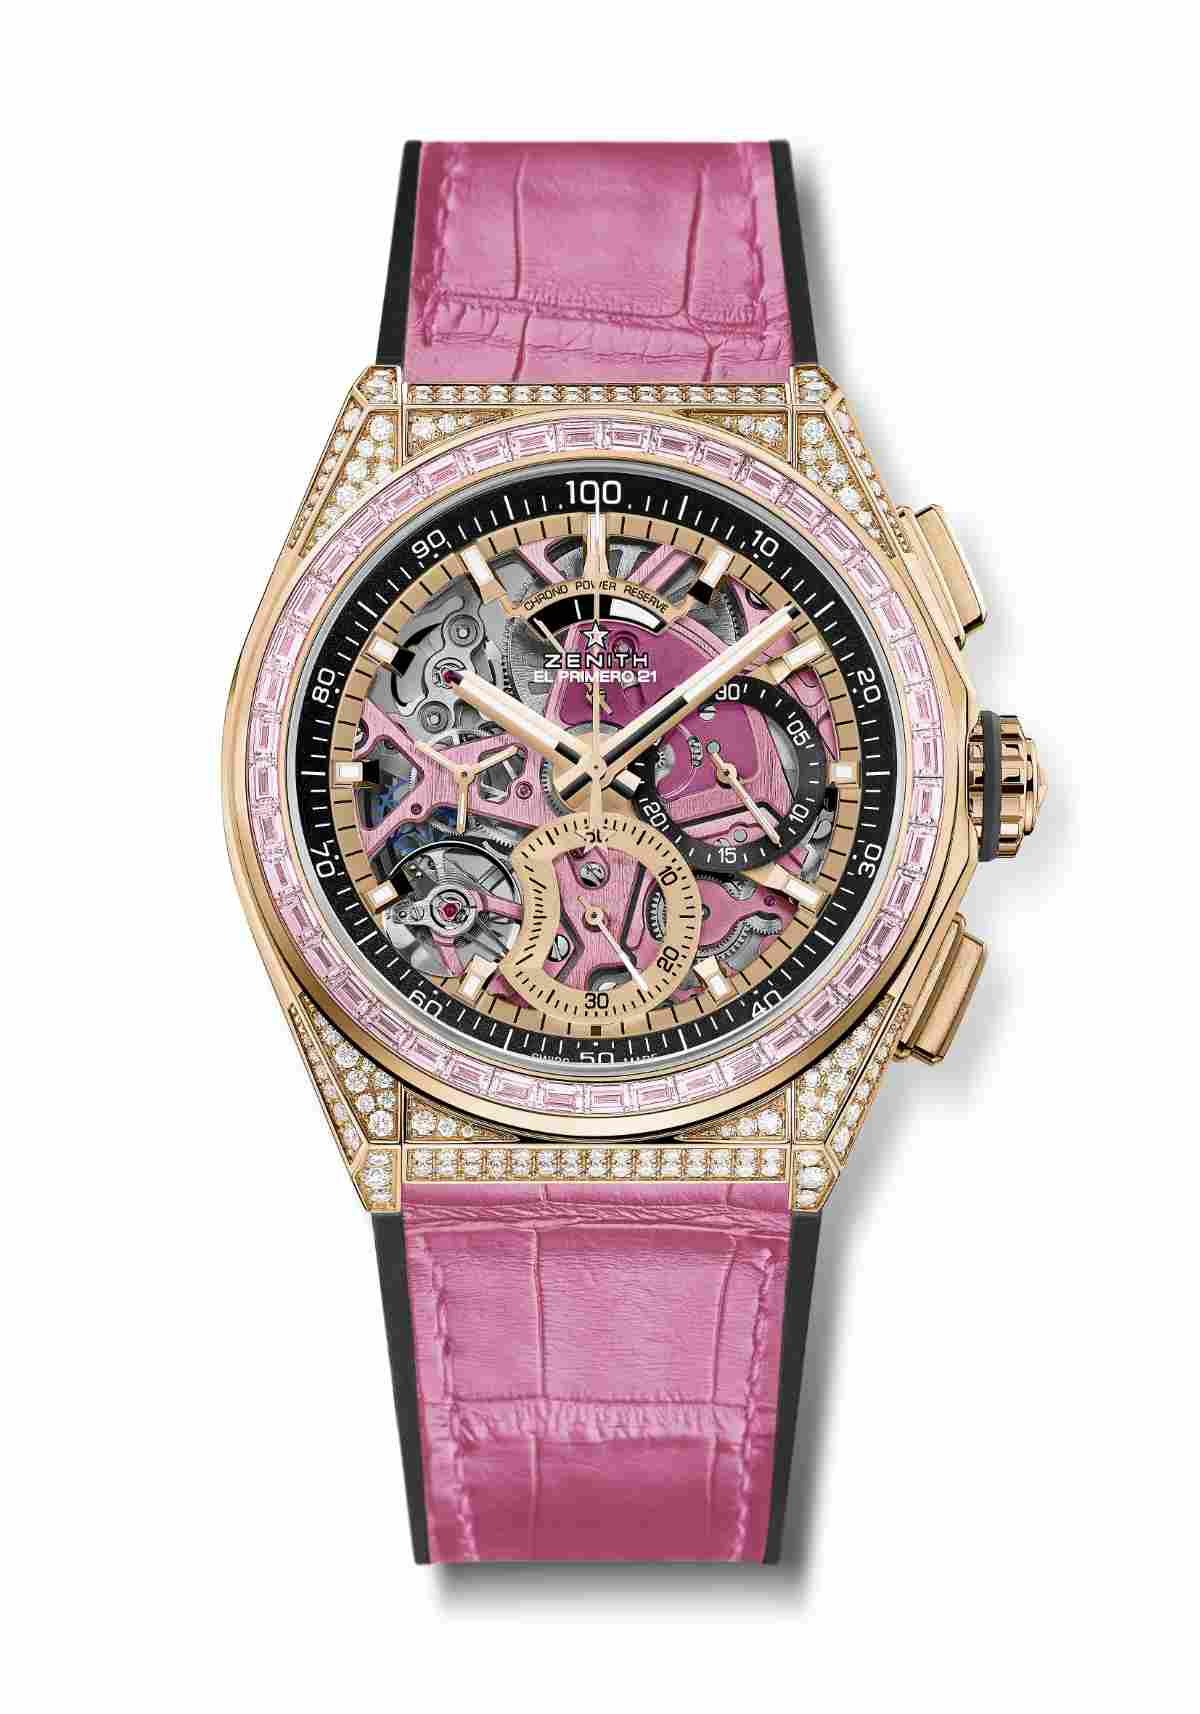 Pink for summer, pink for hope: Zenith takes on a worthy cause for women with the Defy 21 Pink Edition